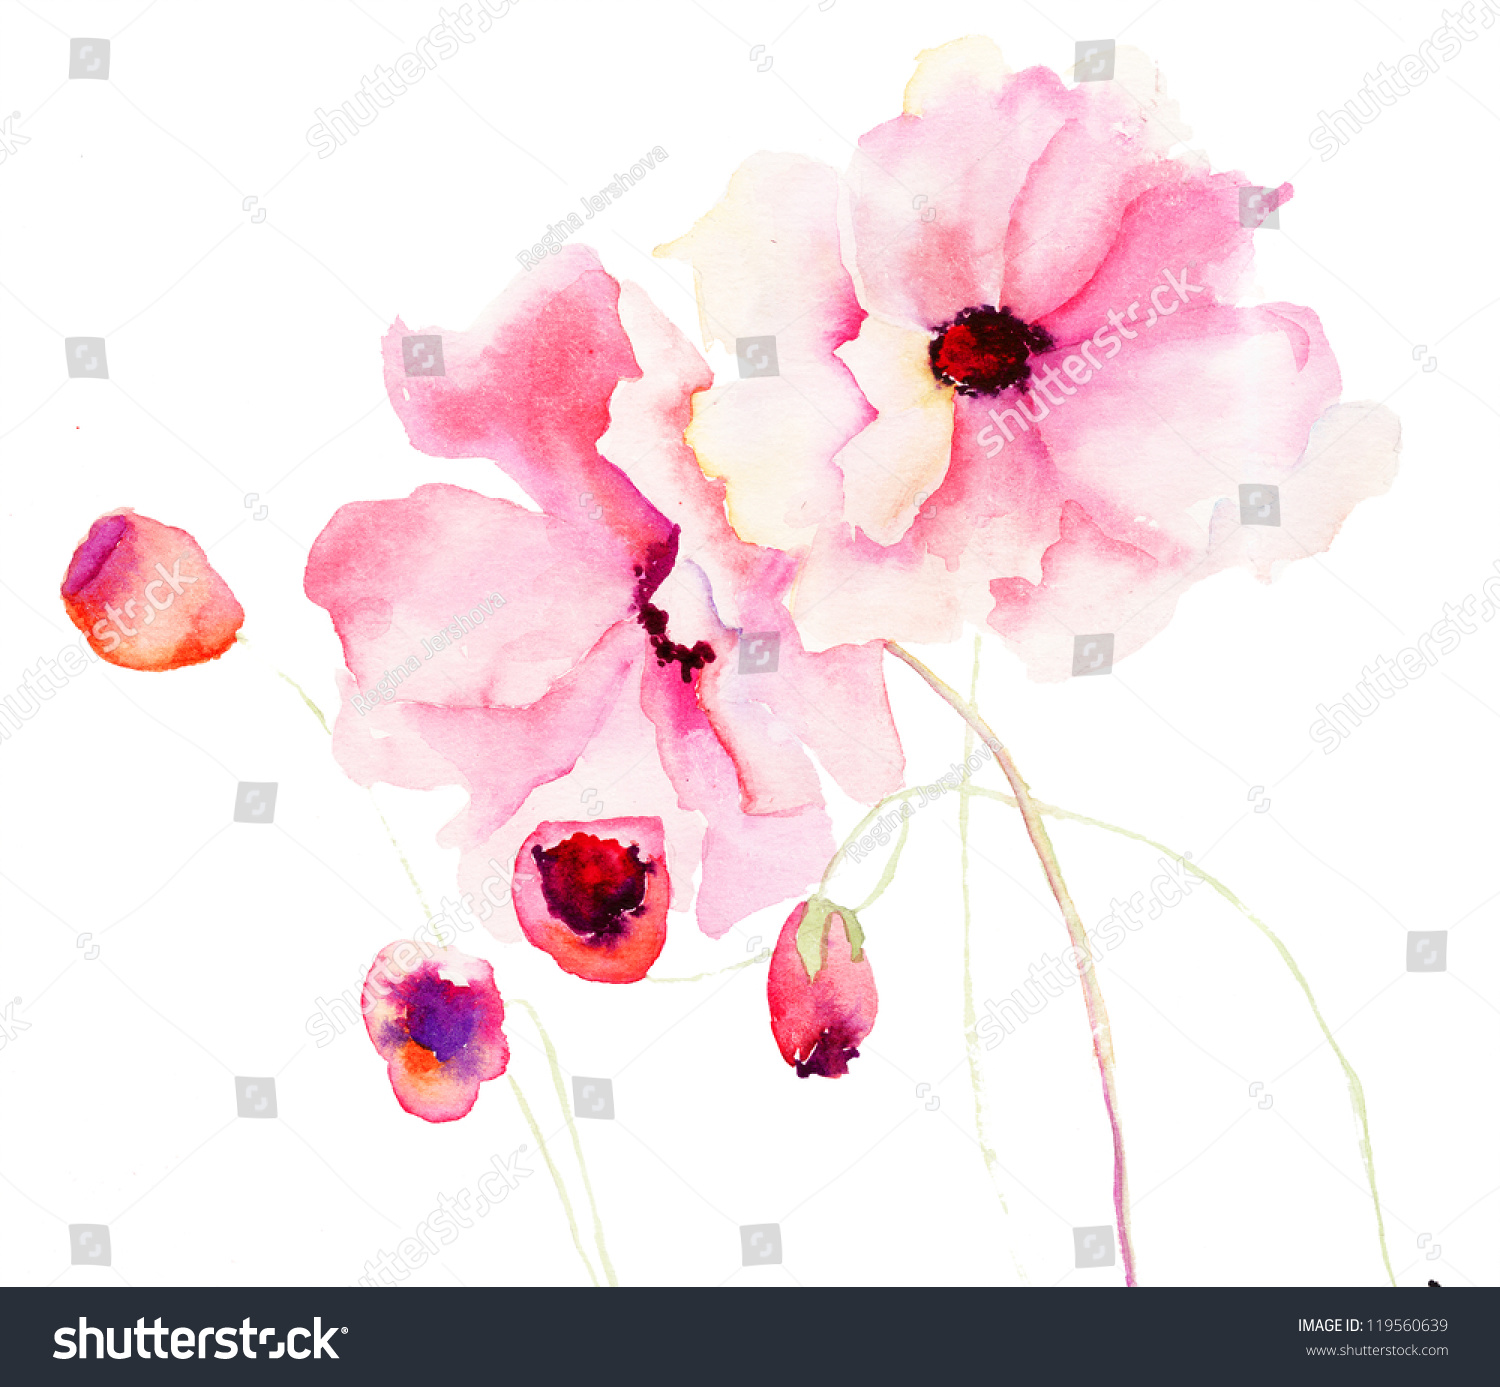 Colorful Pink Flowers, Watercolor Illustration - 119560639 : Shutterstock